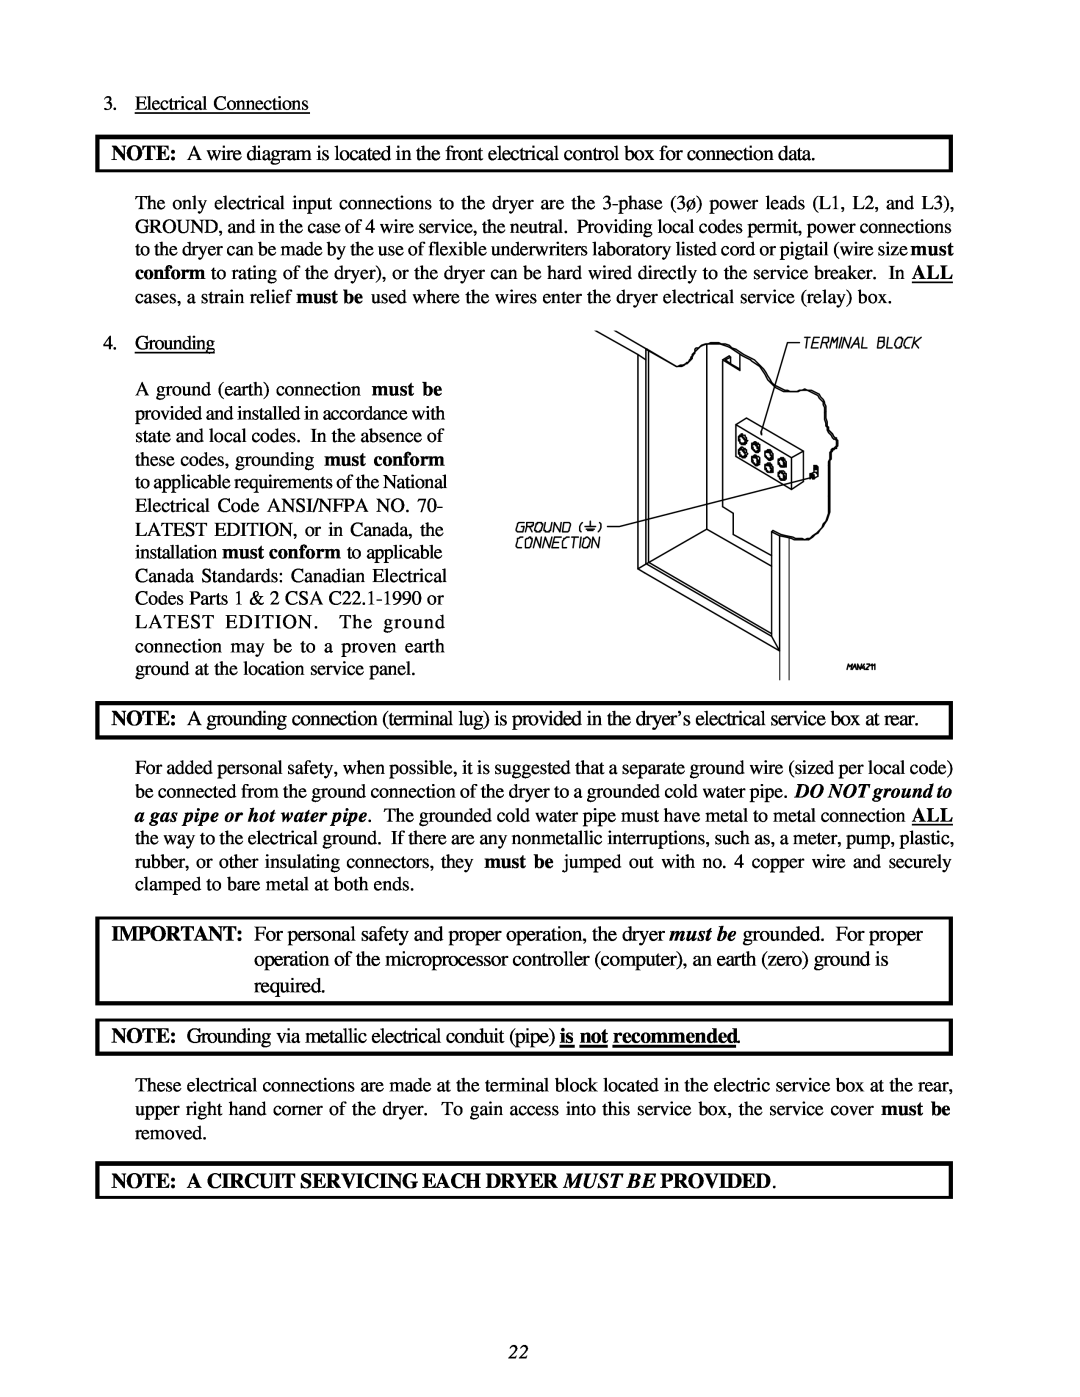 American Dryer Corp ML-122D installation manual Note A Circuit Servicing Each Dryer Must Be Provided 